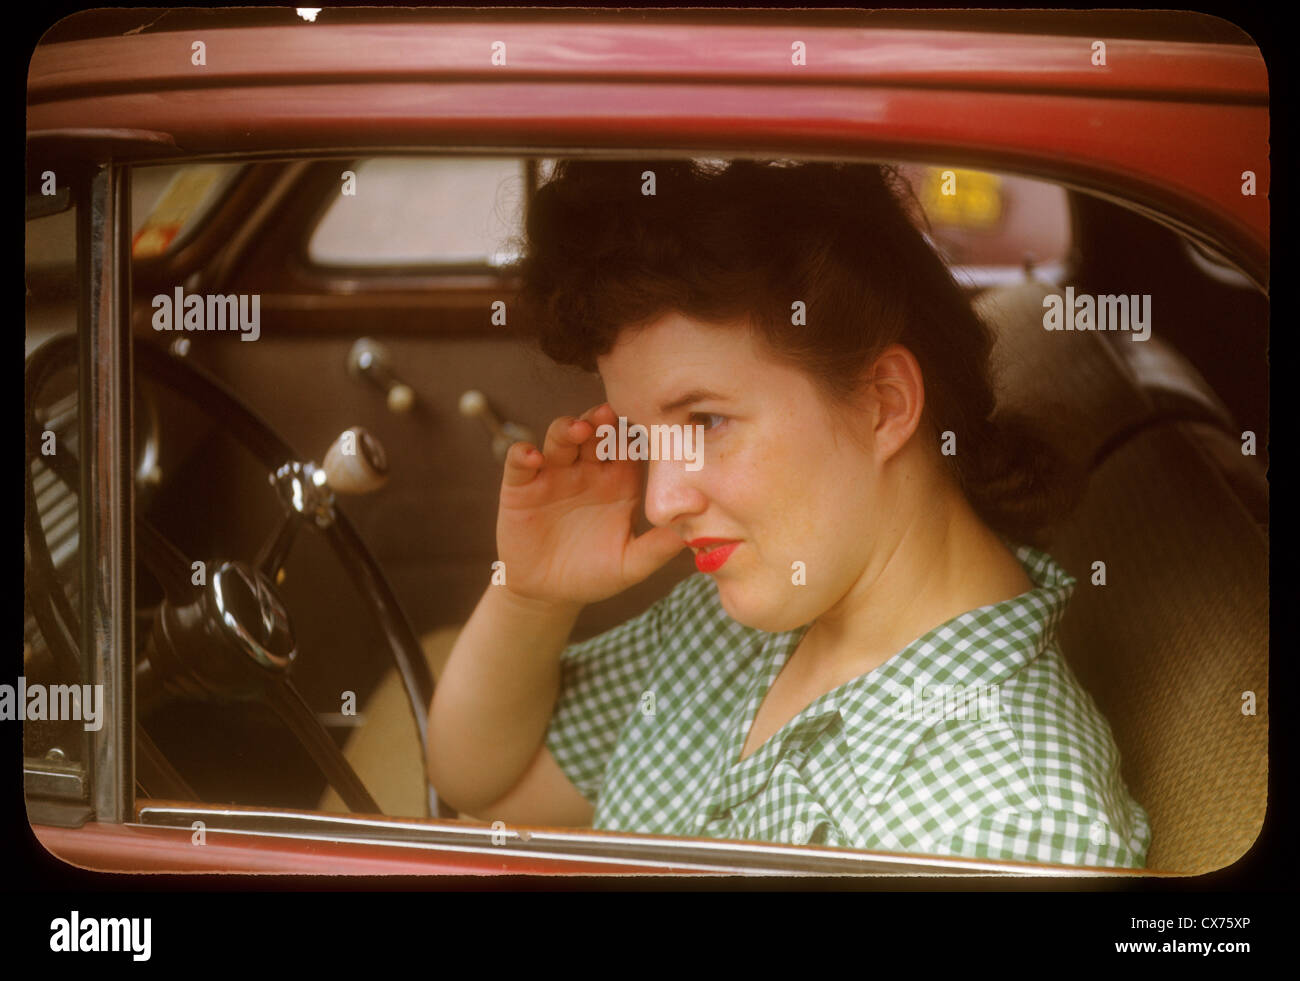 woman in 1940s car portrait kodachrome fashion Indiana midwest steering wheel drivers seat driver 1950s red lipstick makeup Stock Photo